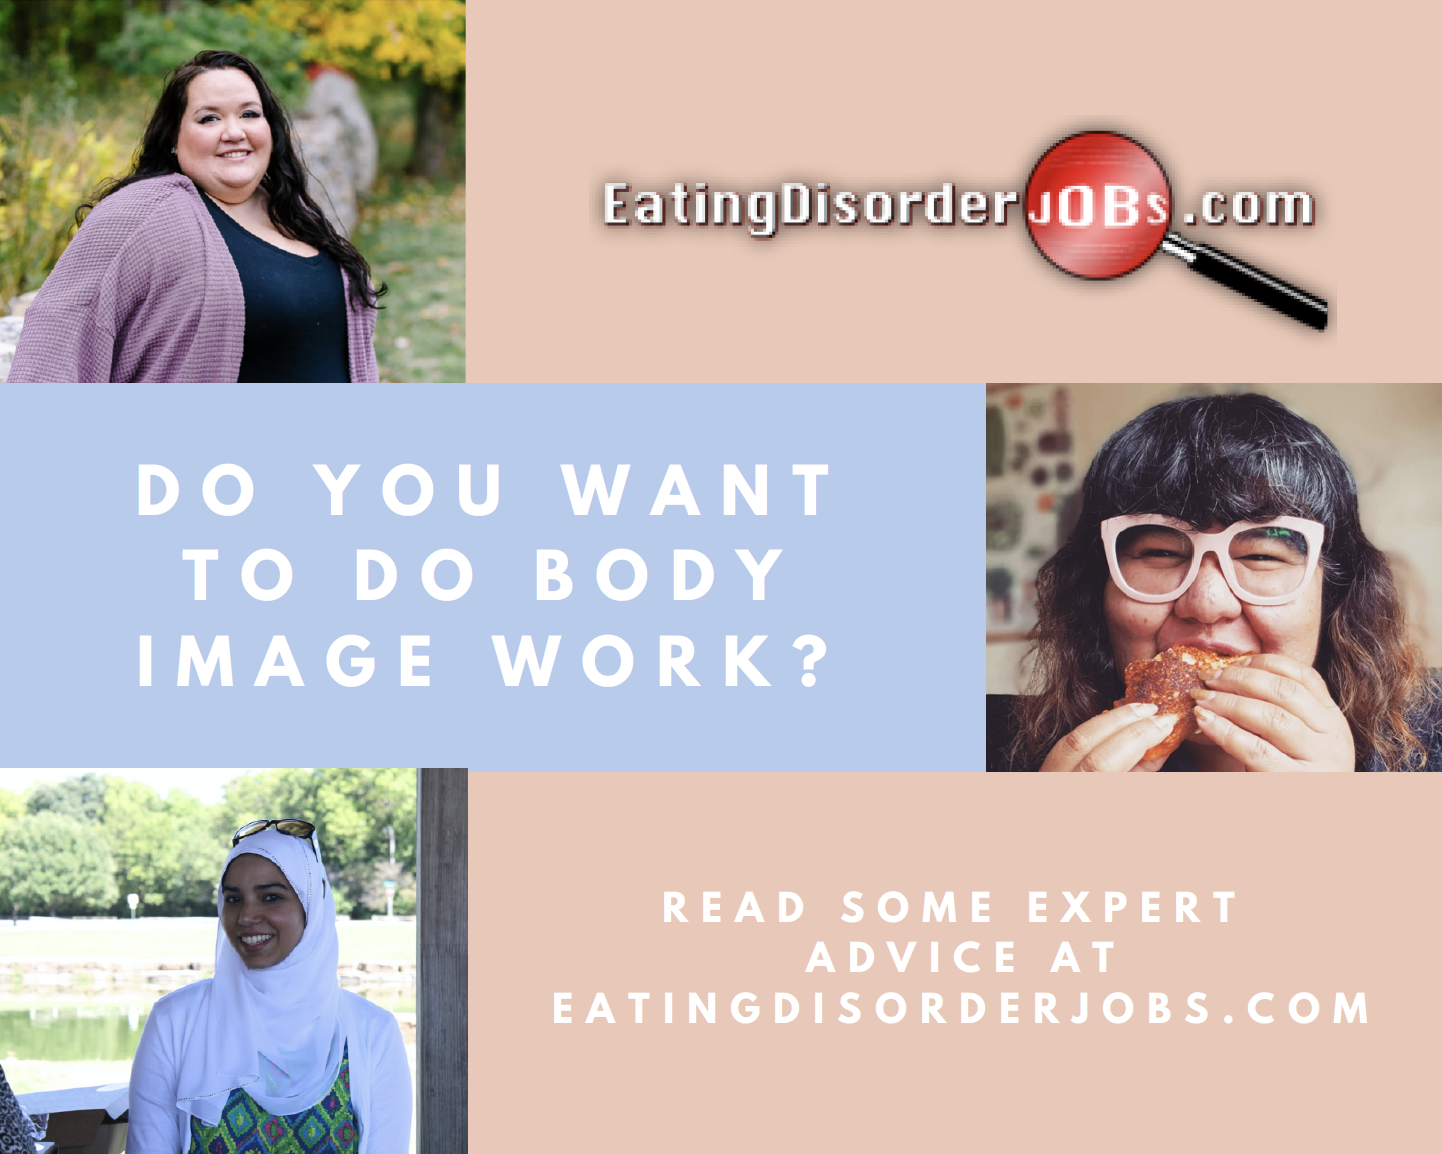 Academy of eating disorders jobs